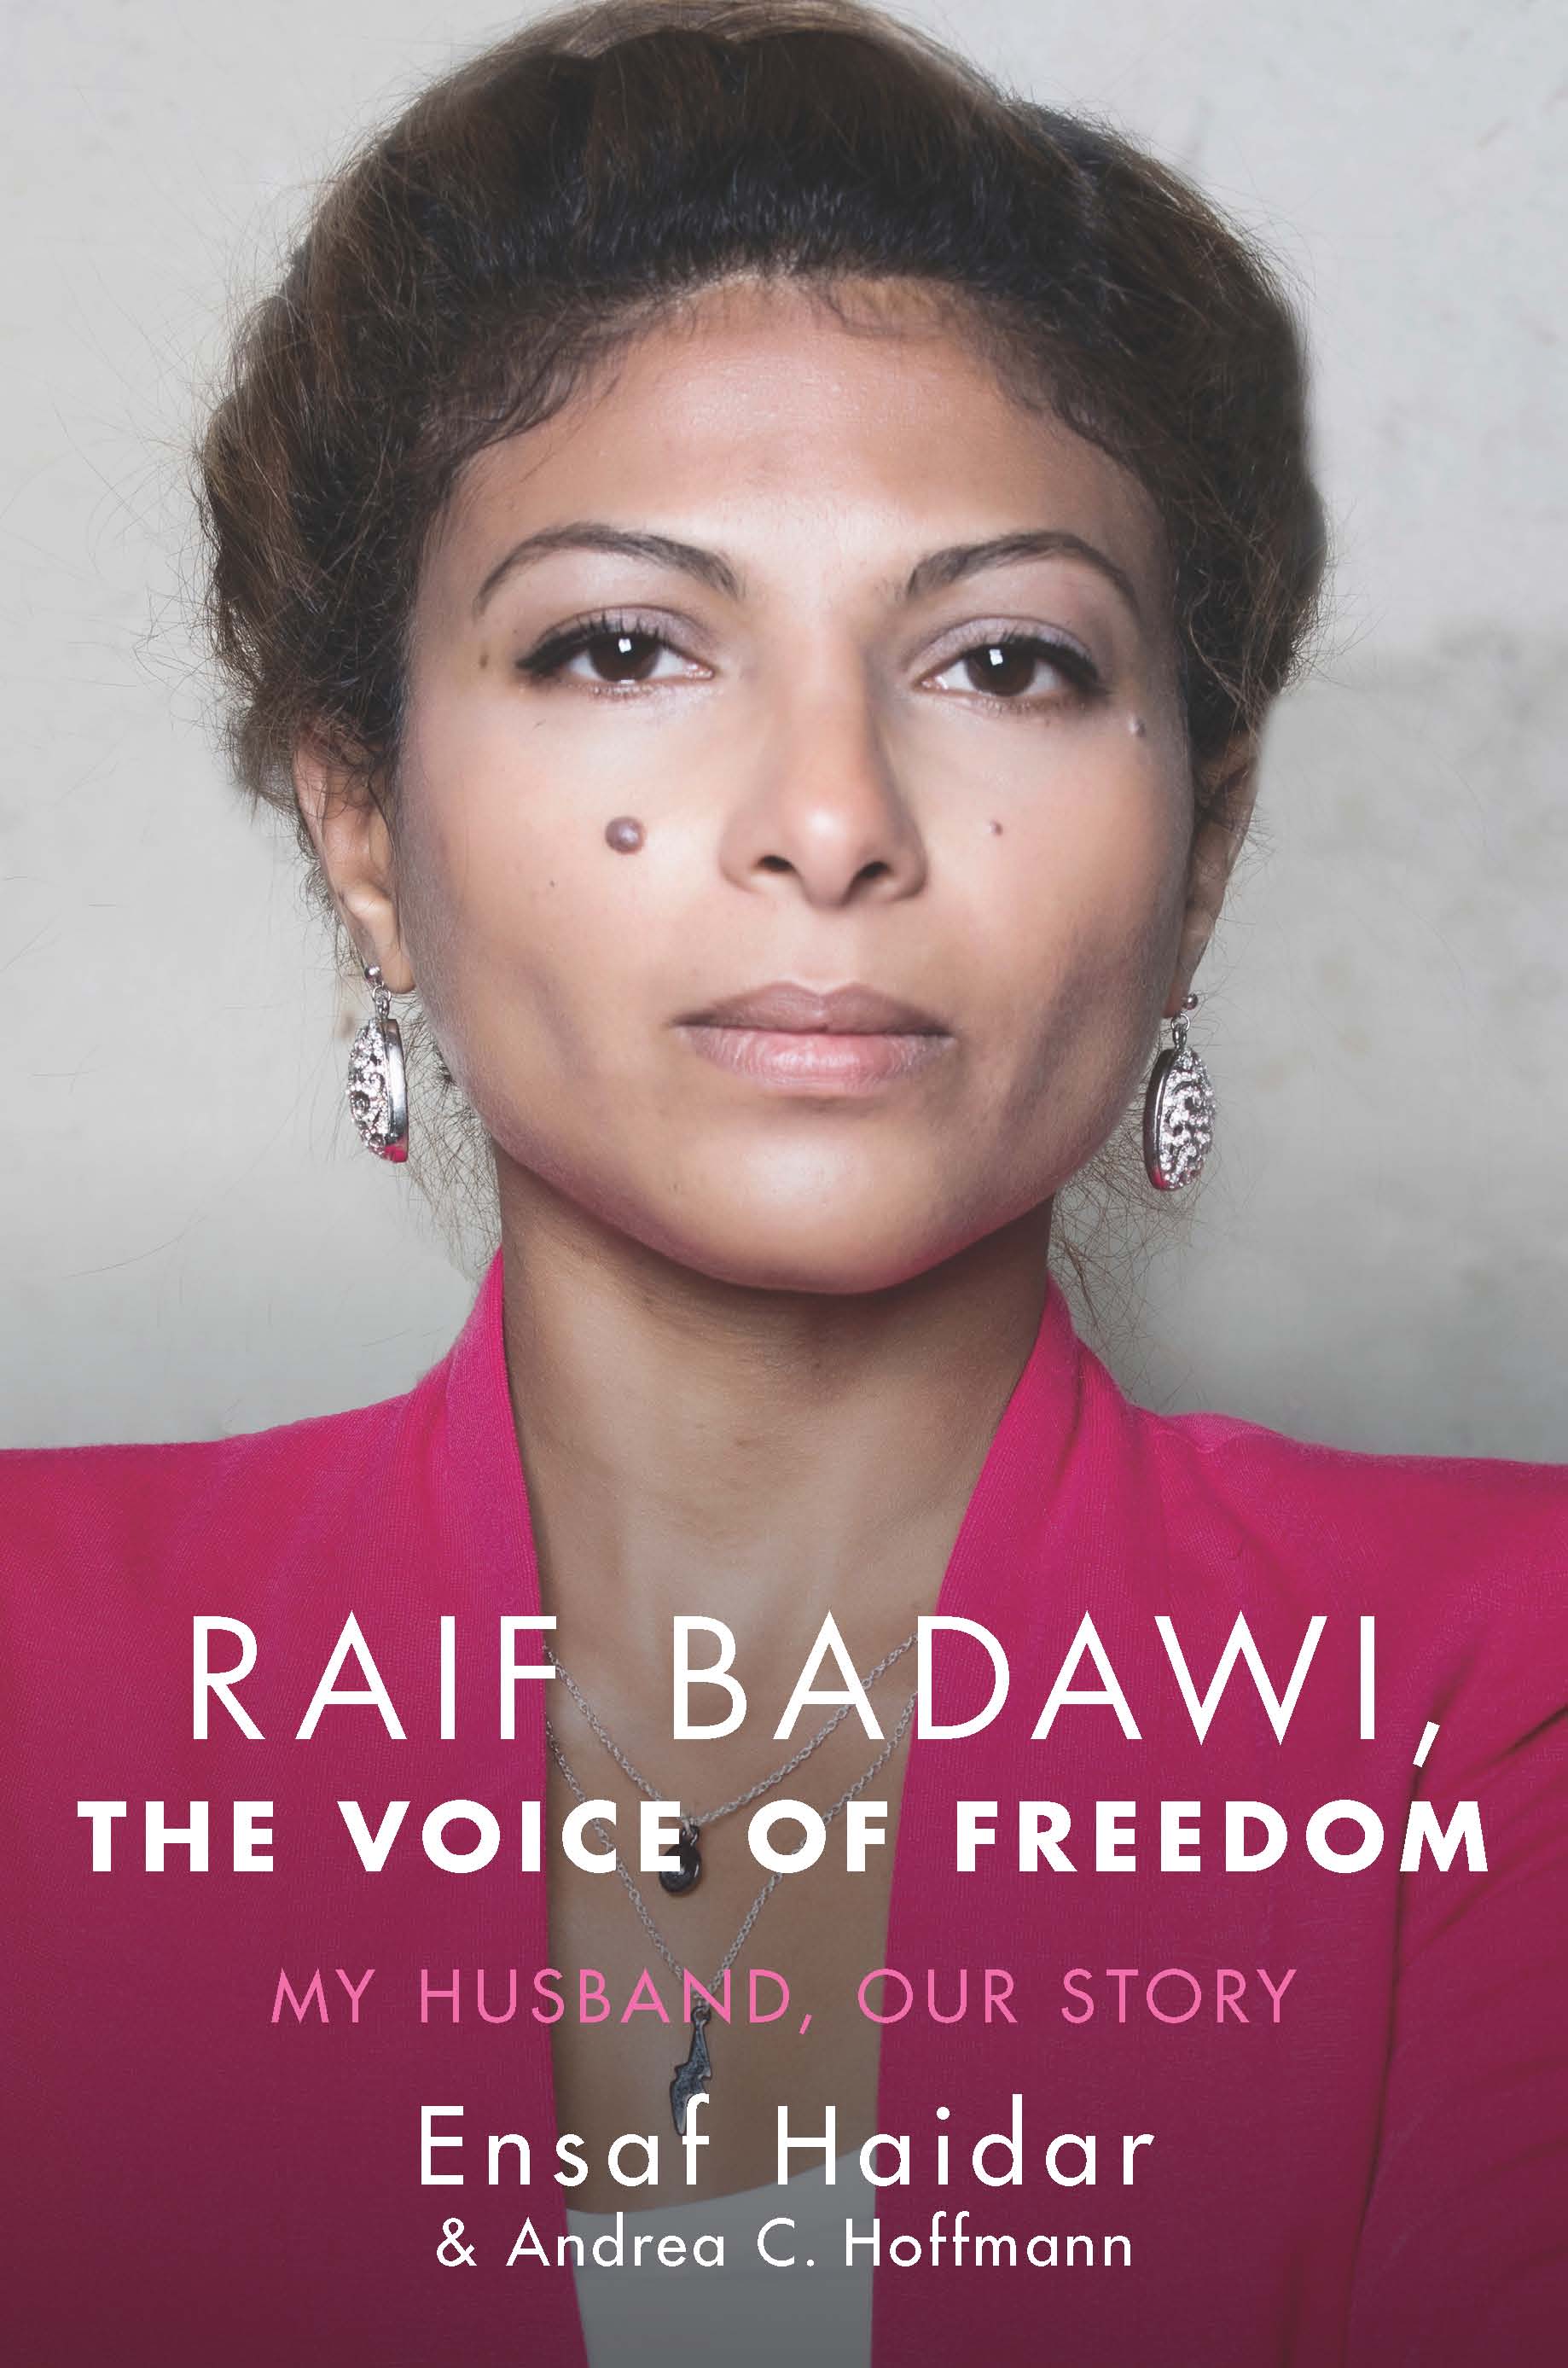 Raif Badawi, The Voice of Freedom: My Husband, Our Story